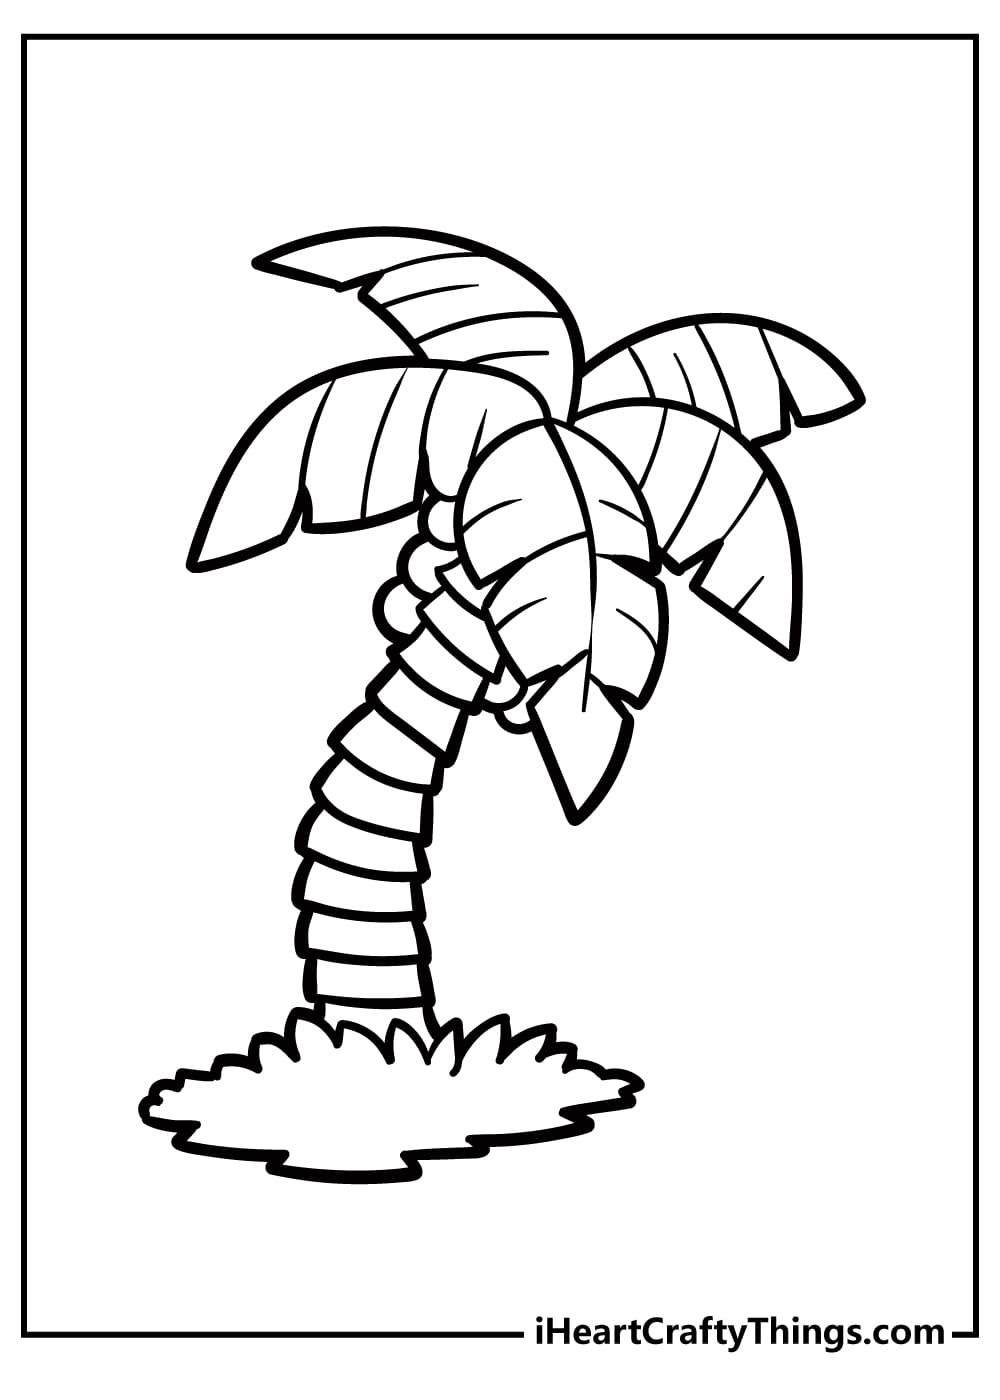 Palm Tree Image For Children